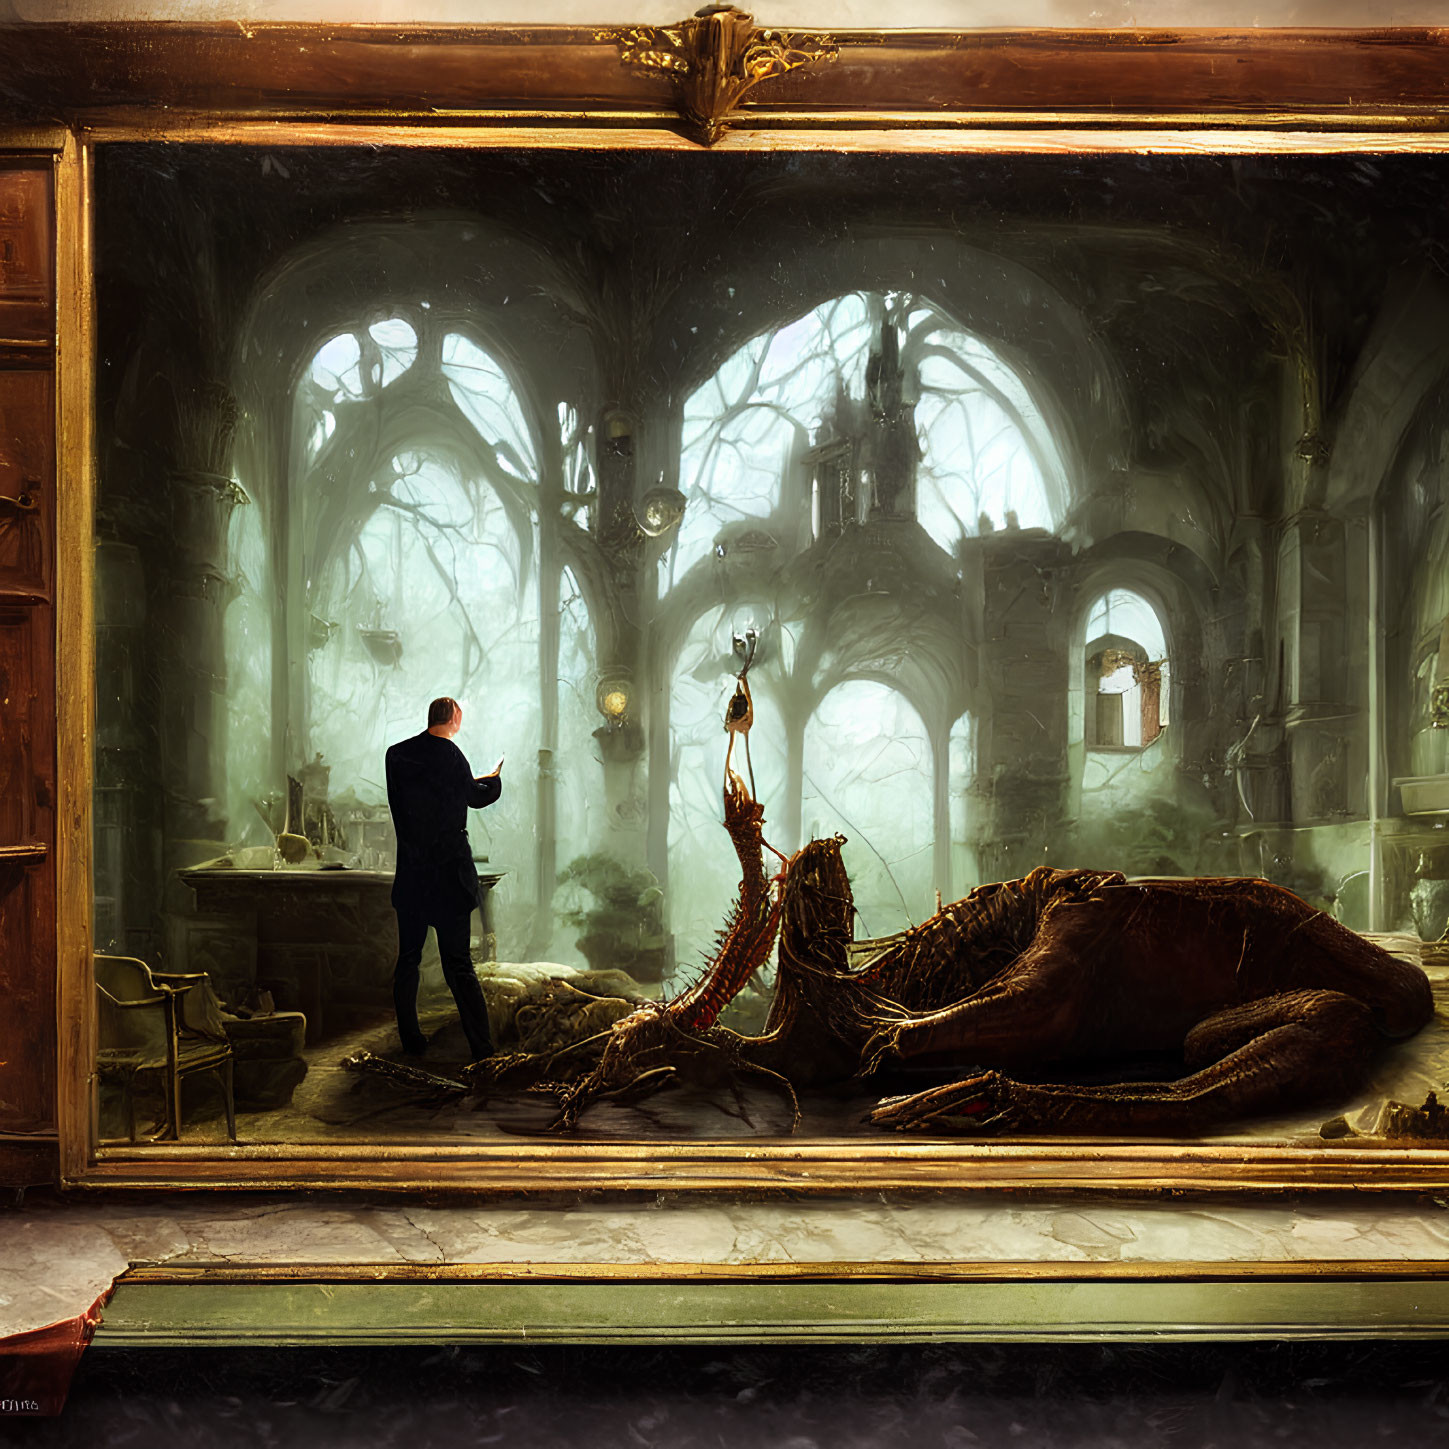 Person in suit in misty, gothic study with defeated dragon-like creature